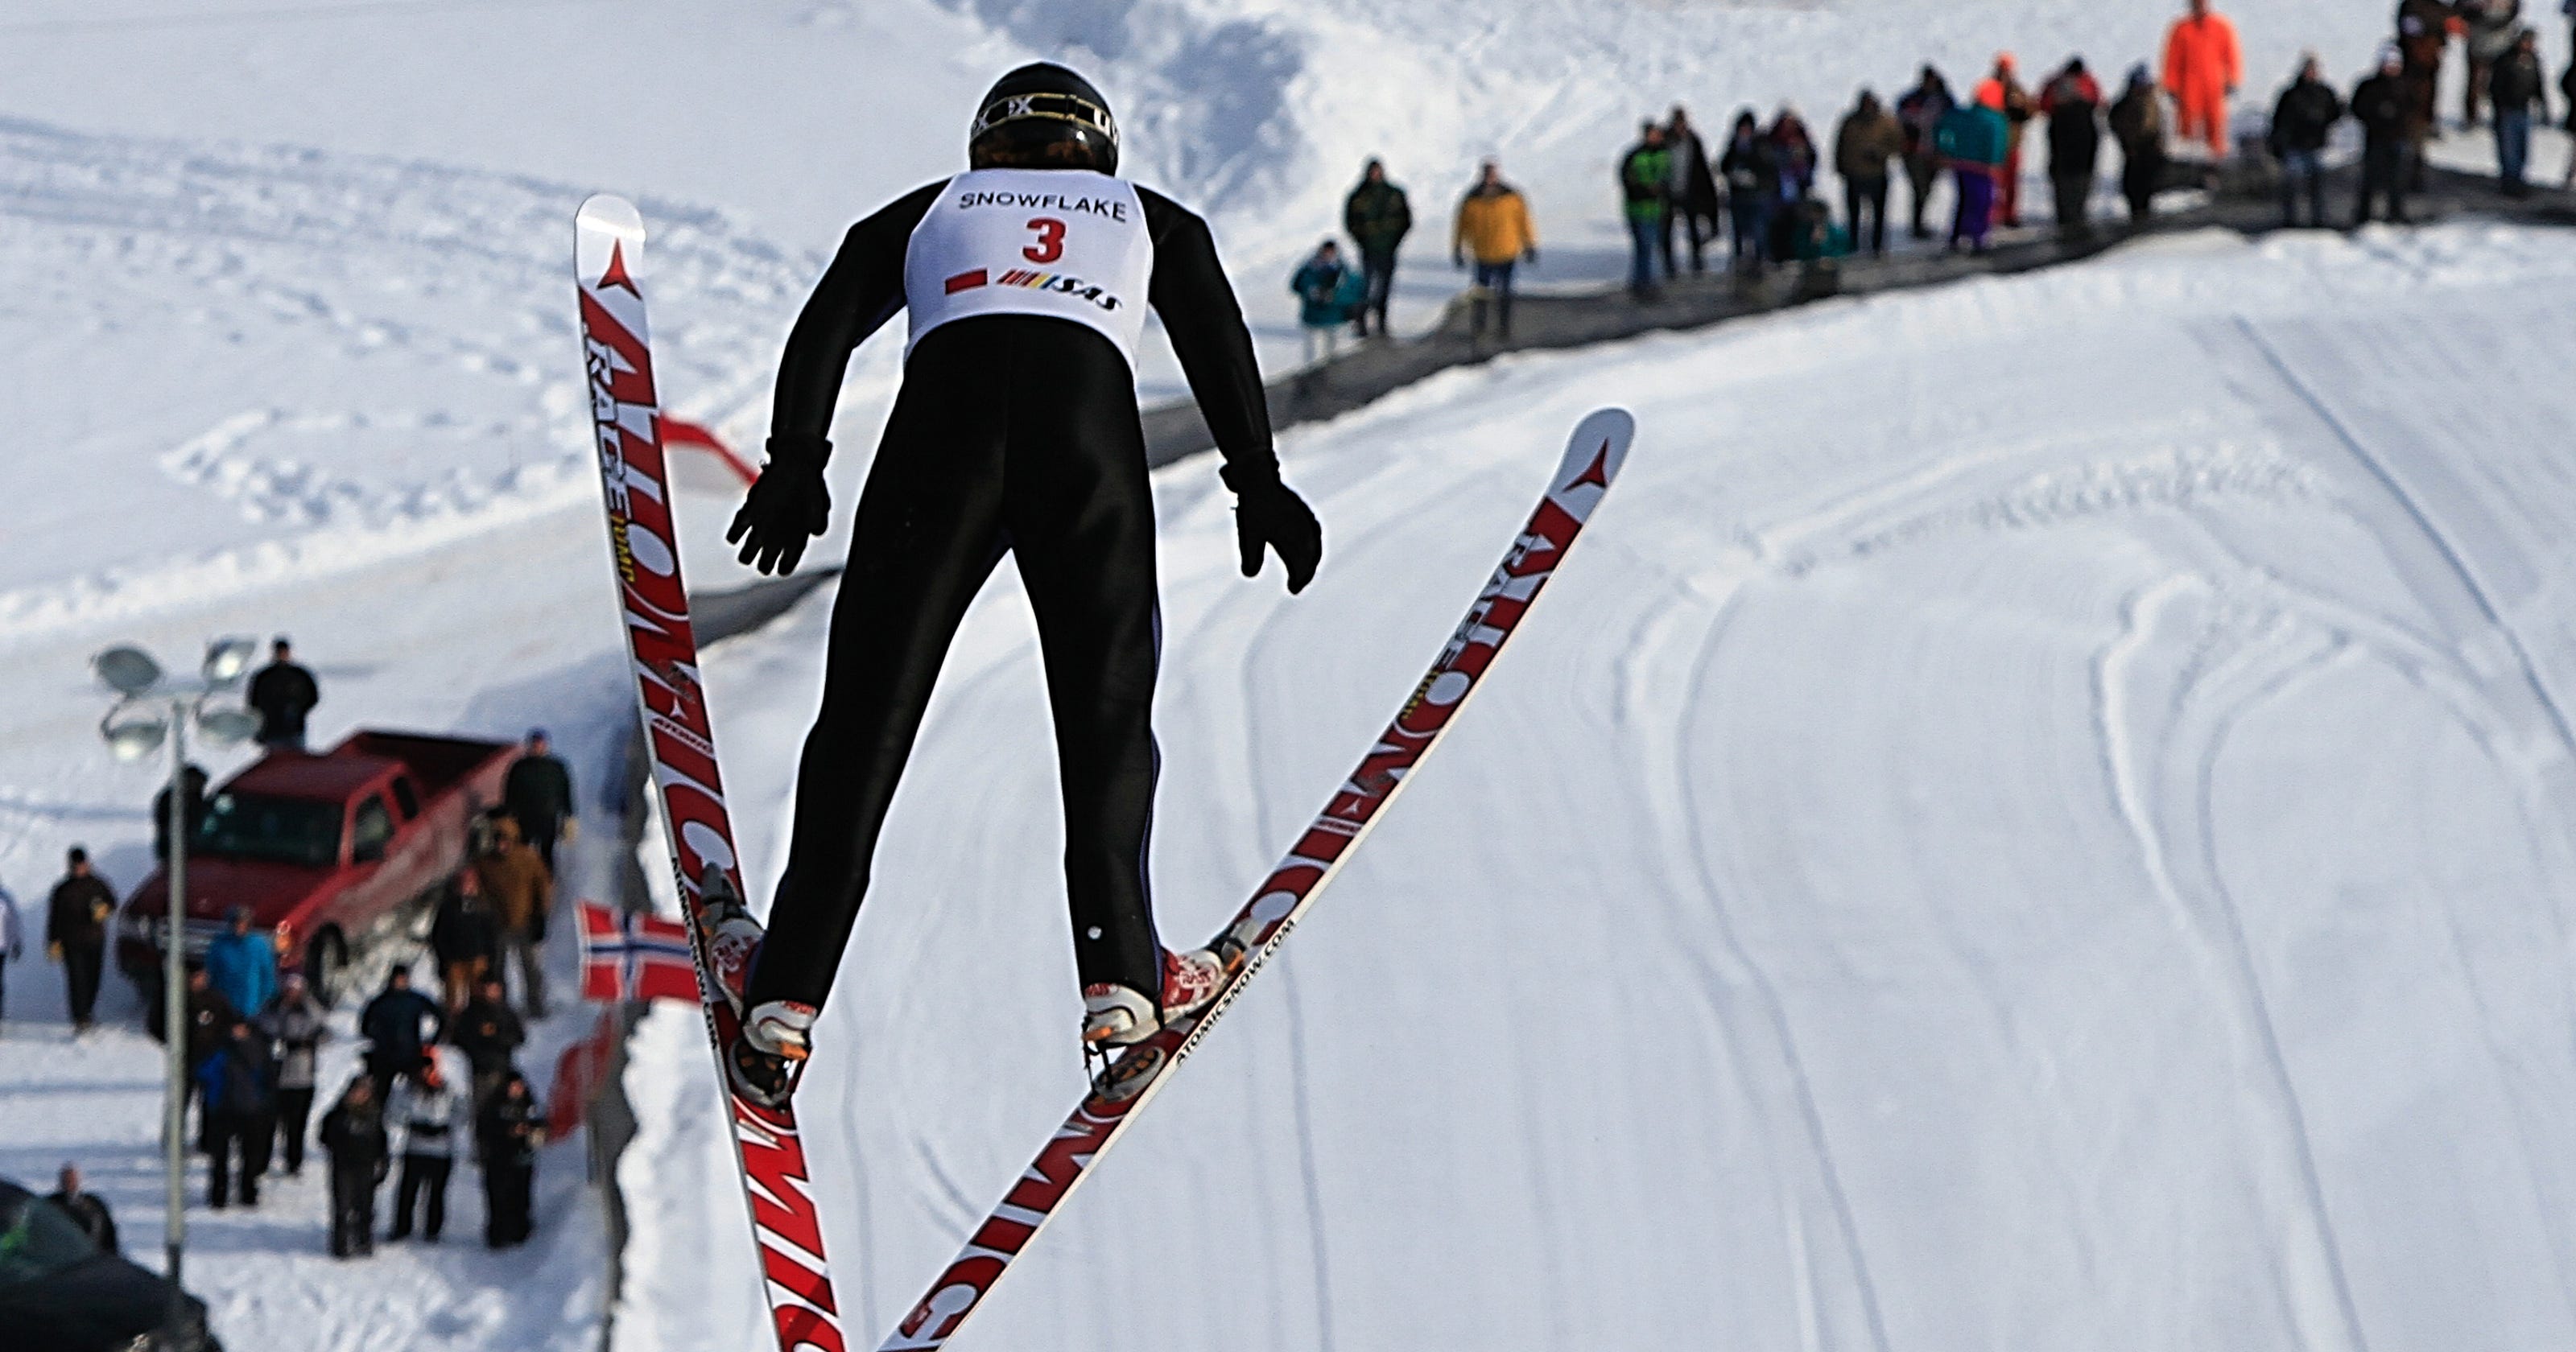 snowflake-ski-jumping-tournament-brings-jumpers-to-olympic-size-hill-in